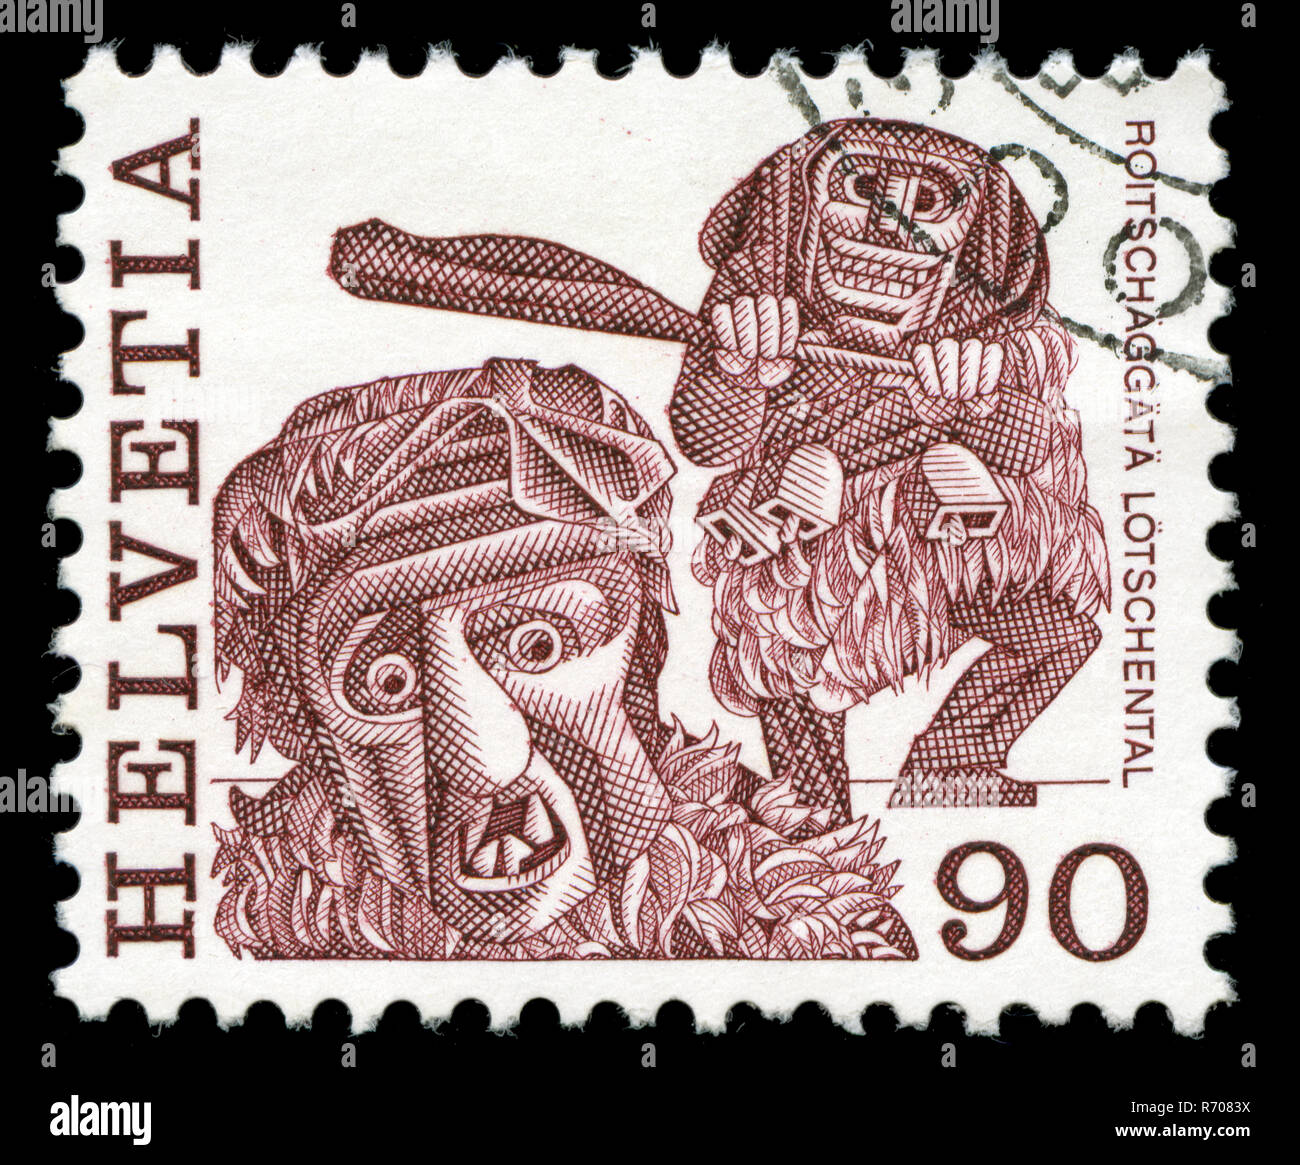 Postage stamp from Switzerland in the Folklore series issued in 1977 Stock Photo